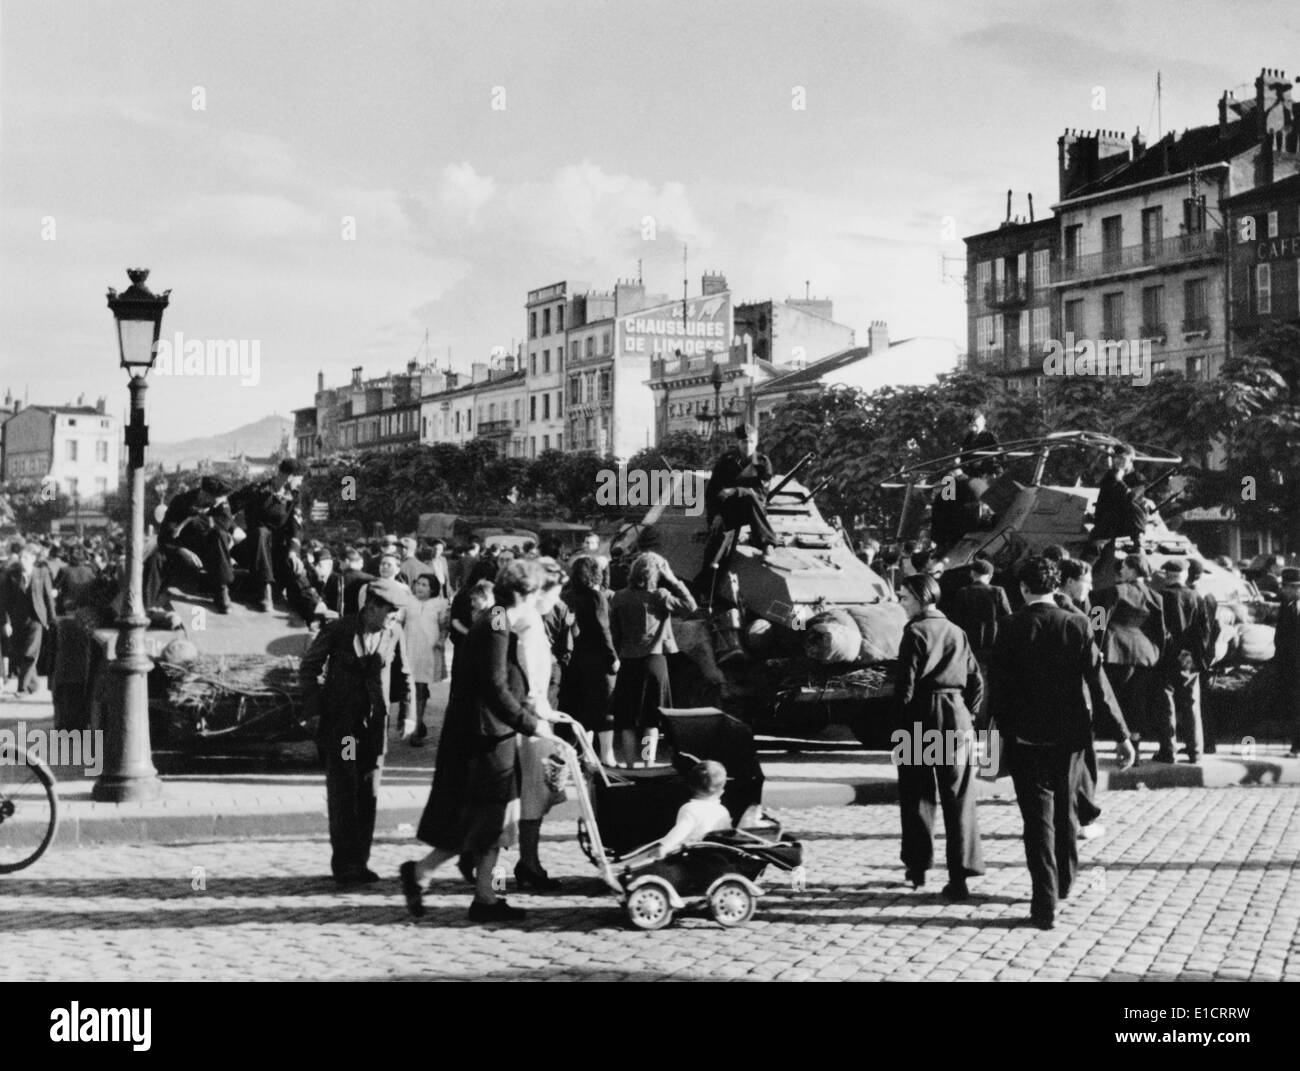 German soldiers with tanks and civilians in occupied Metz, France, ca. June 1940 during World War 2. (BSLOC 2013 11 64) Stock Photo